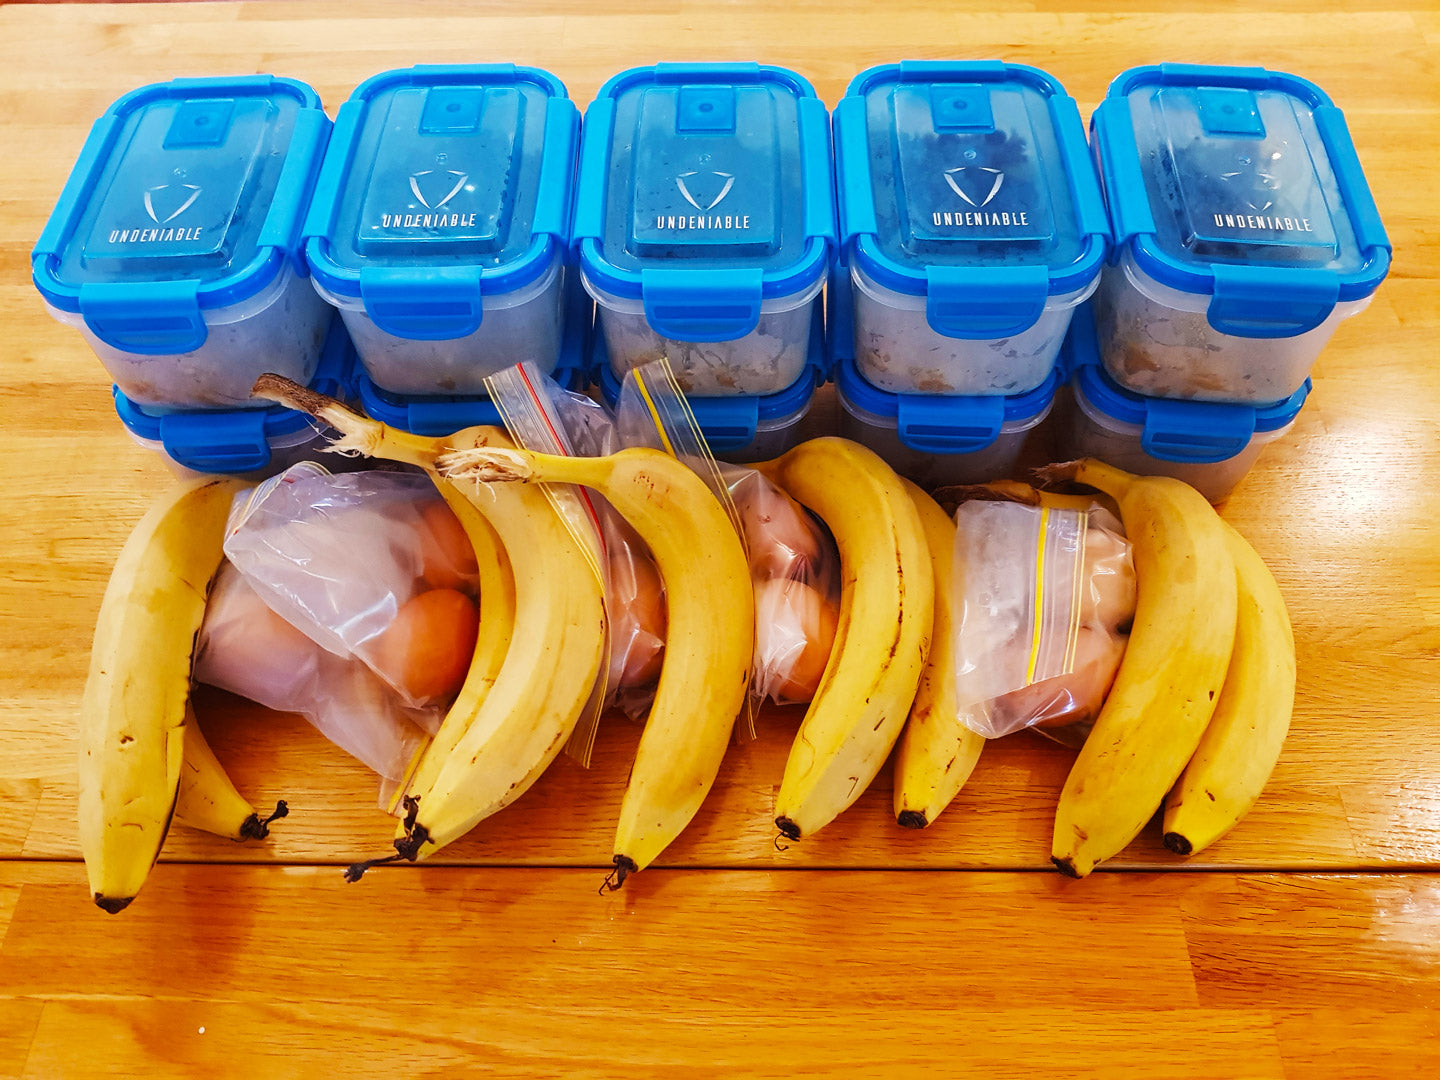 Meal Prep Sunday - 19th August 2018 - 1600 Calories & 6 Meals Per Day